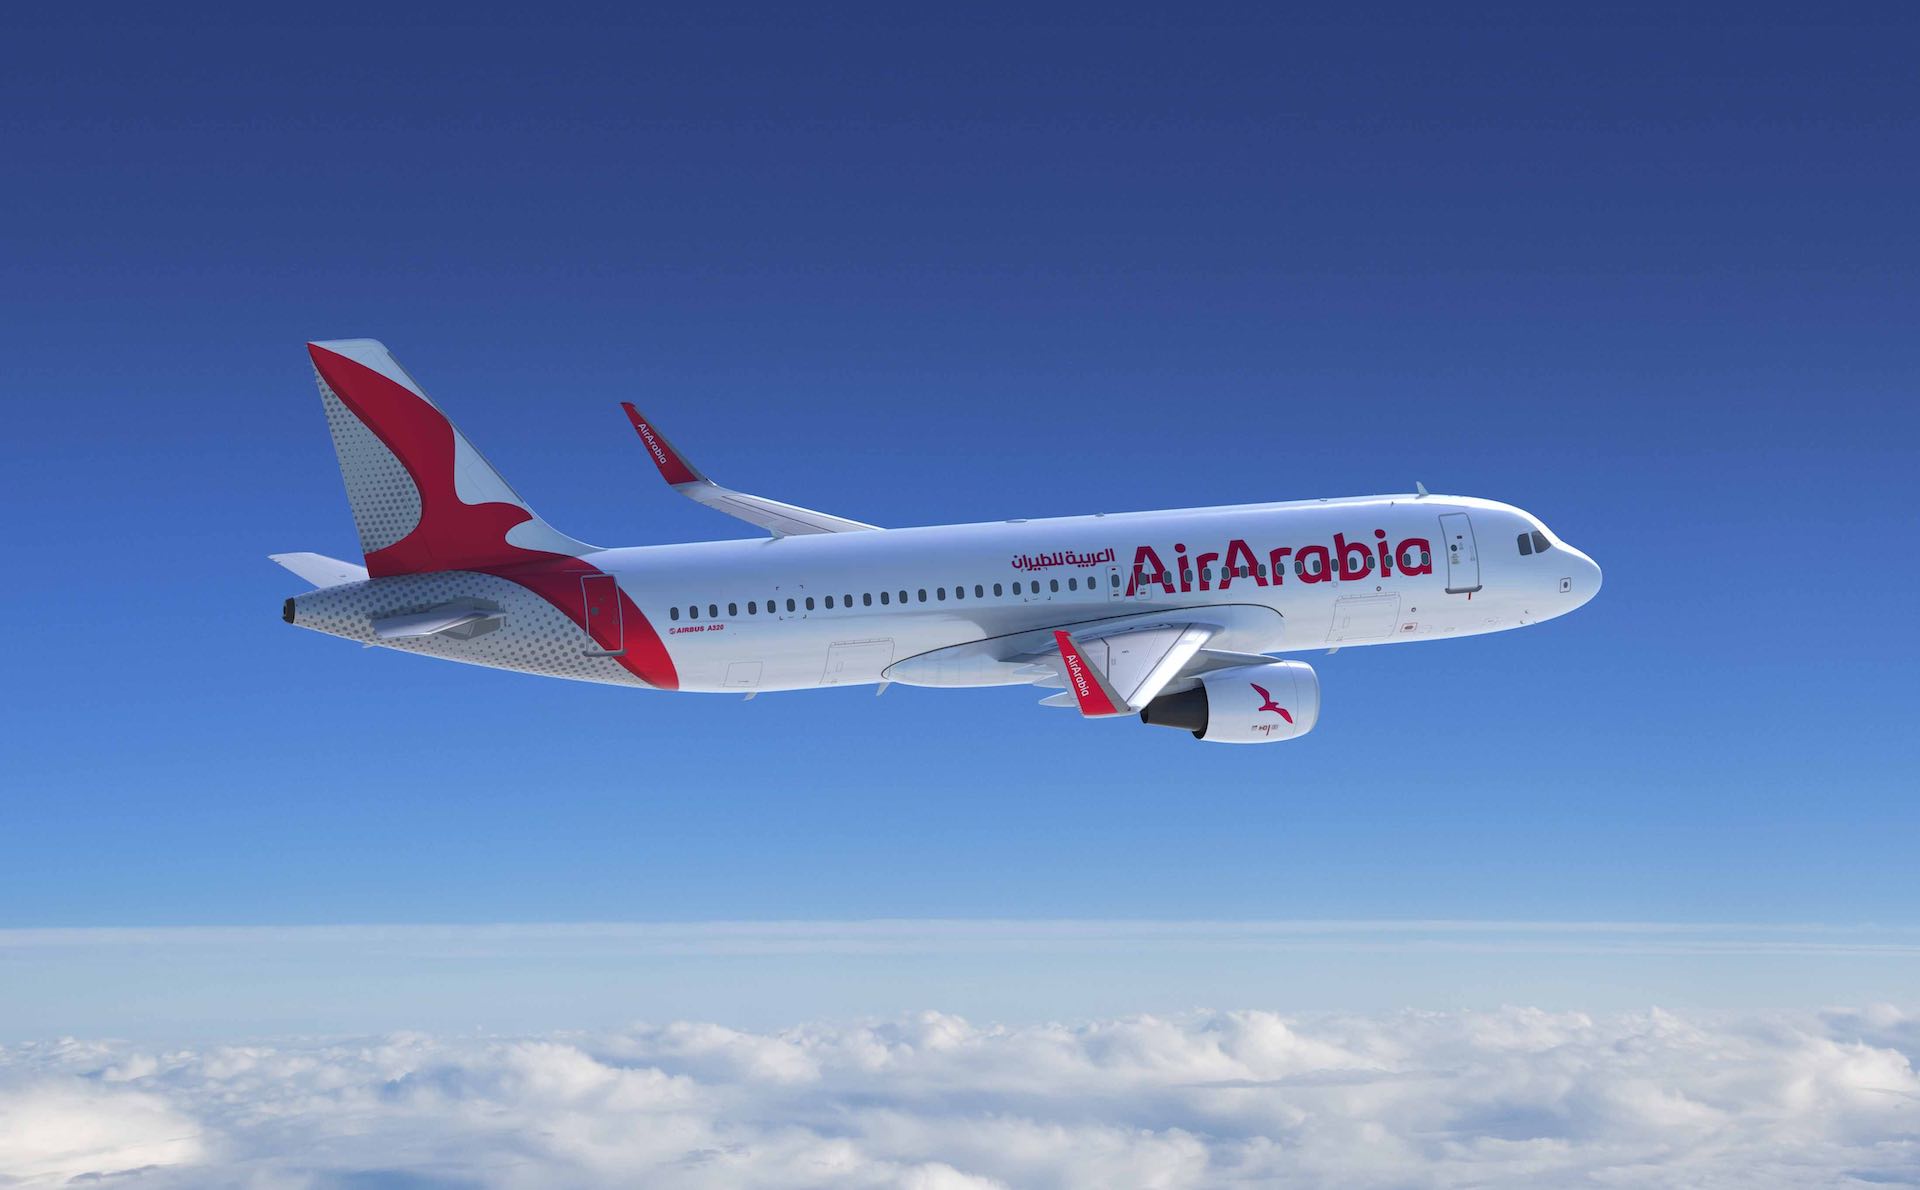 Air Arabia reported a profit of AED416 million for the third quarter